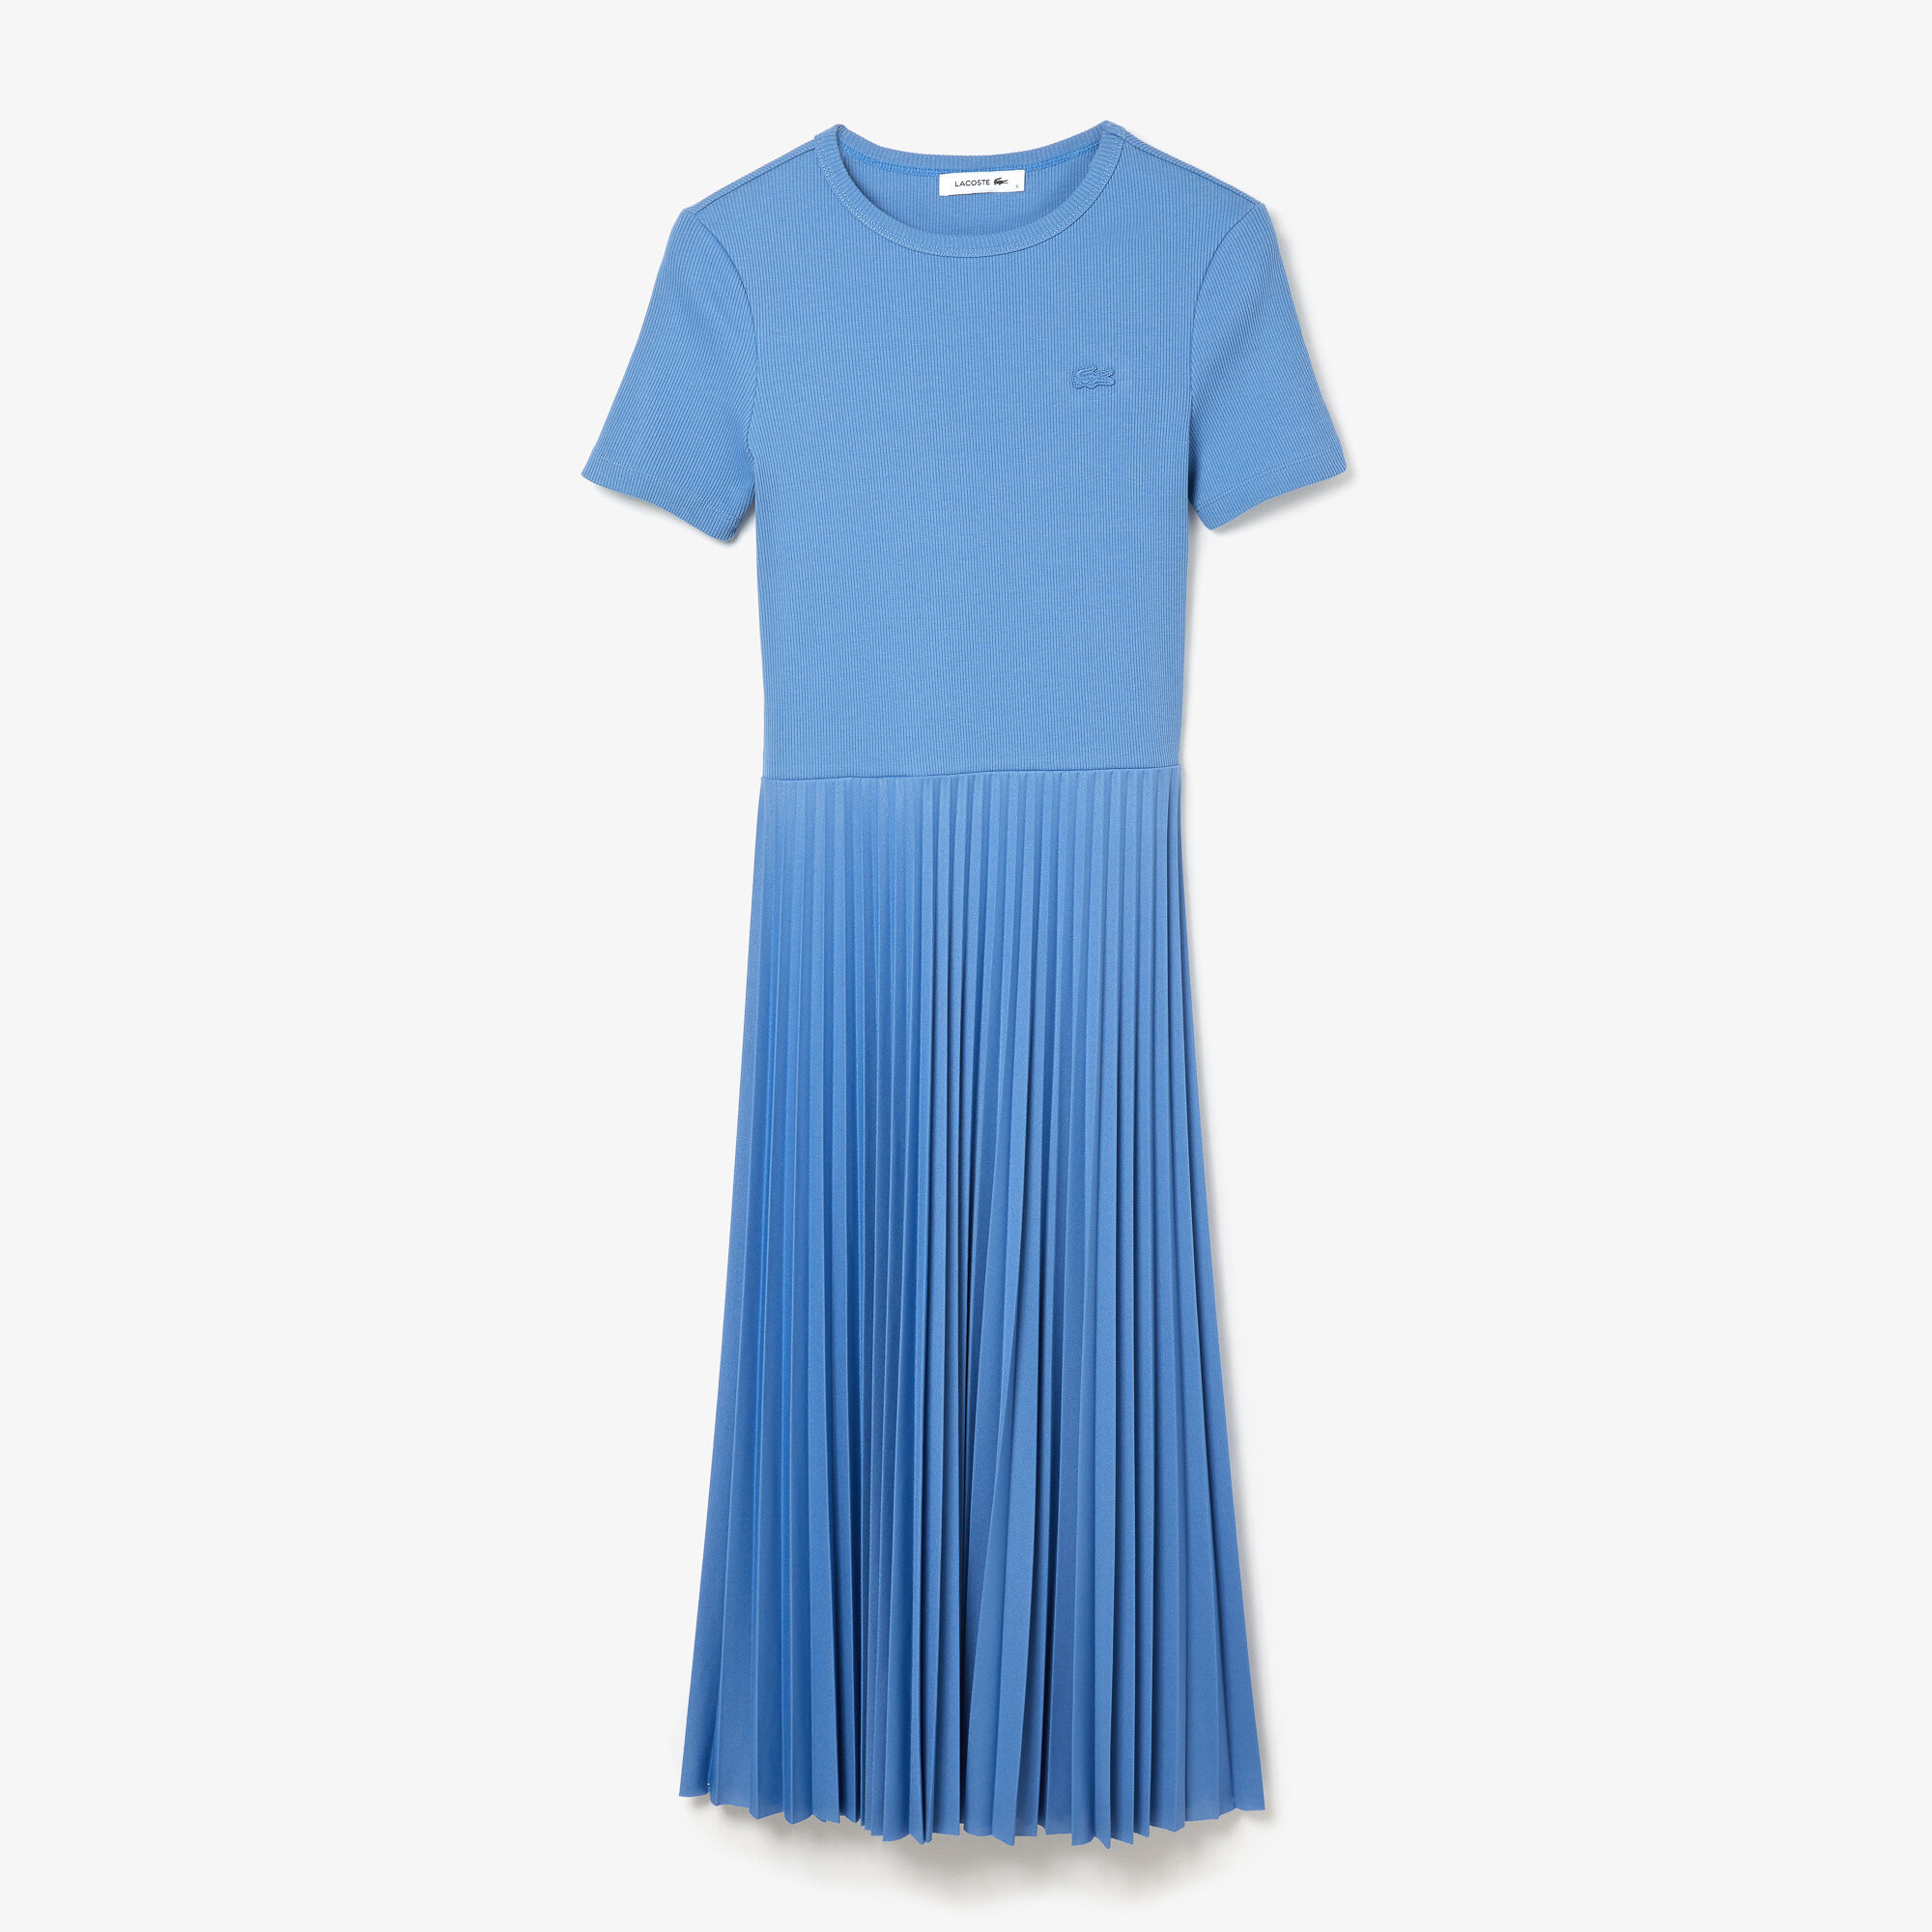 Women’s Mid-Length Textured Pleated Dress